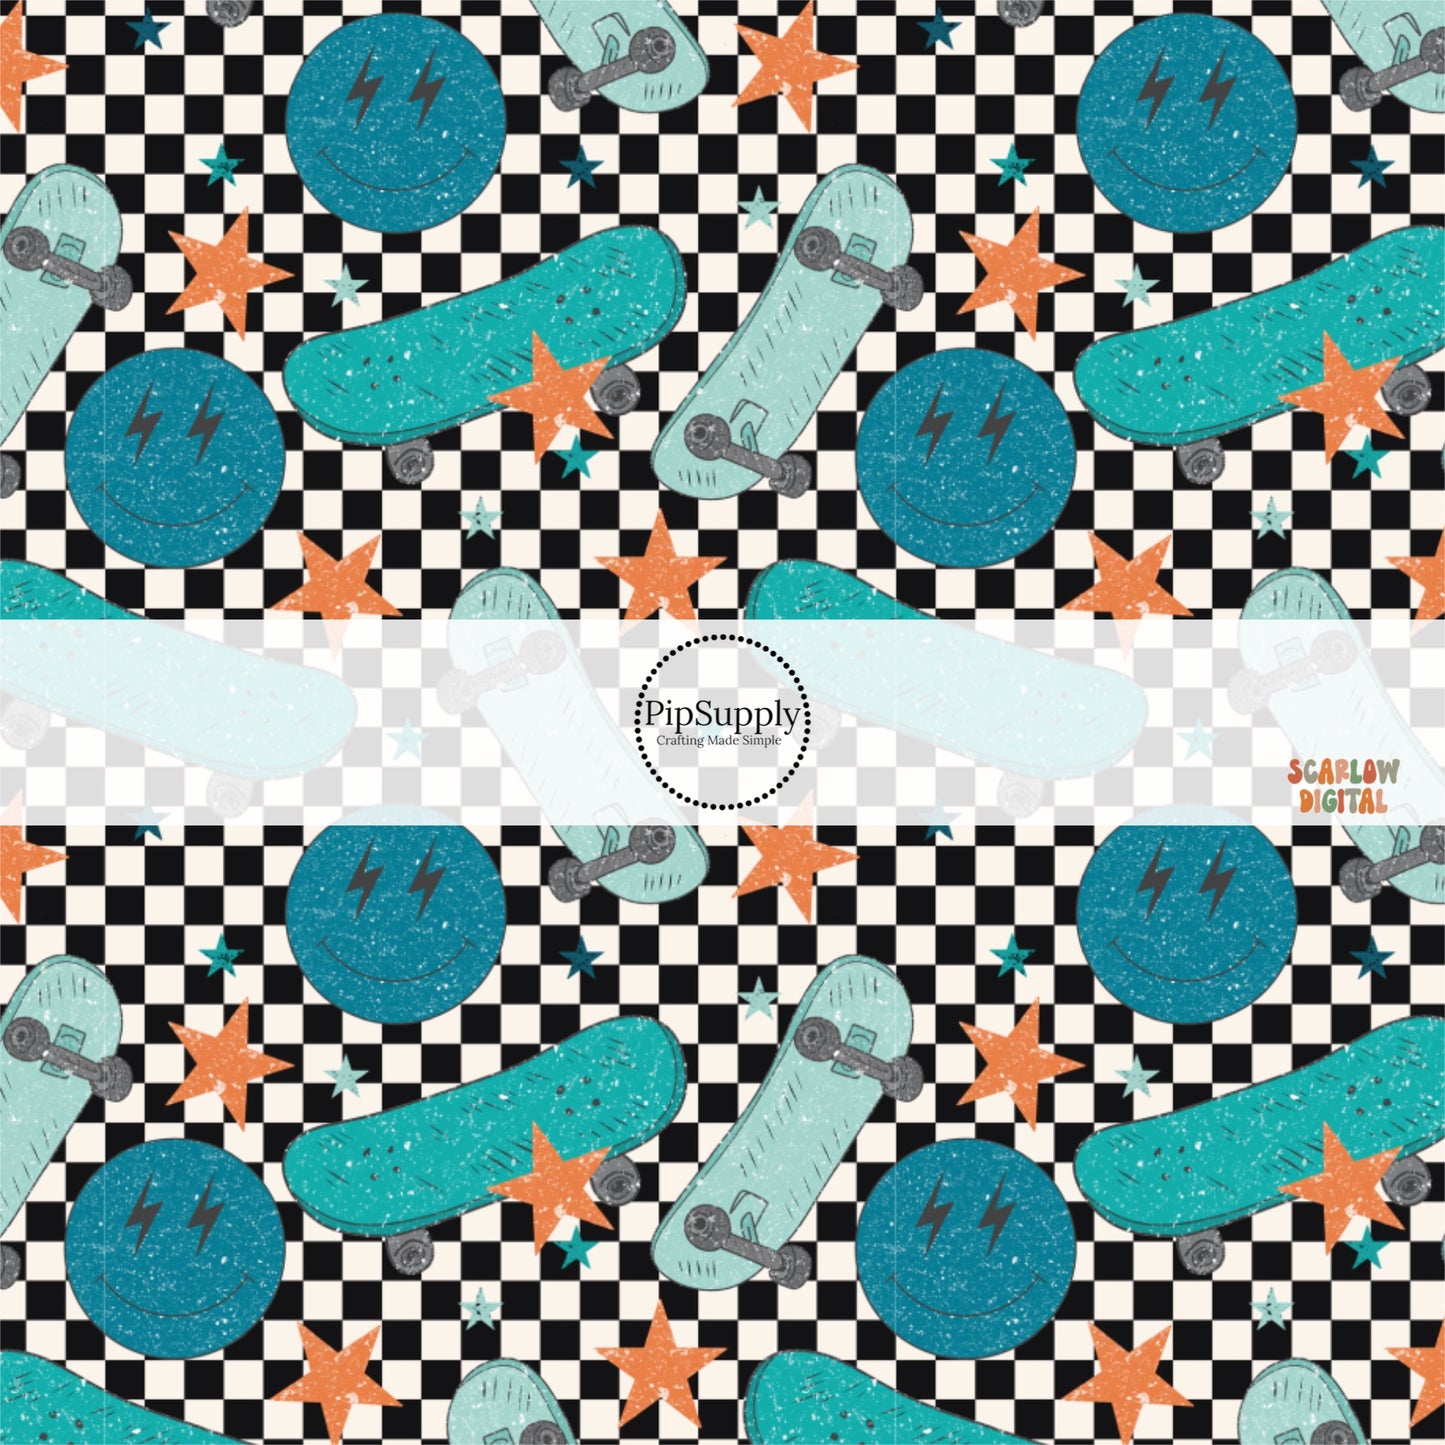 Blue skateboards, smiley faces, and orange stars on black and white checkered fabric by the yard